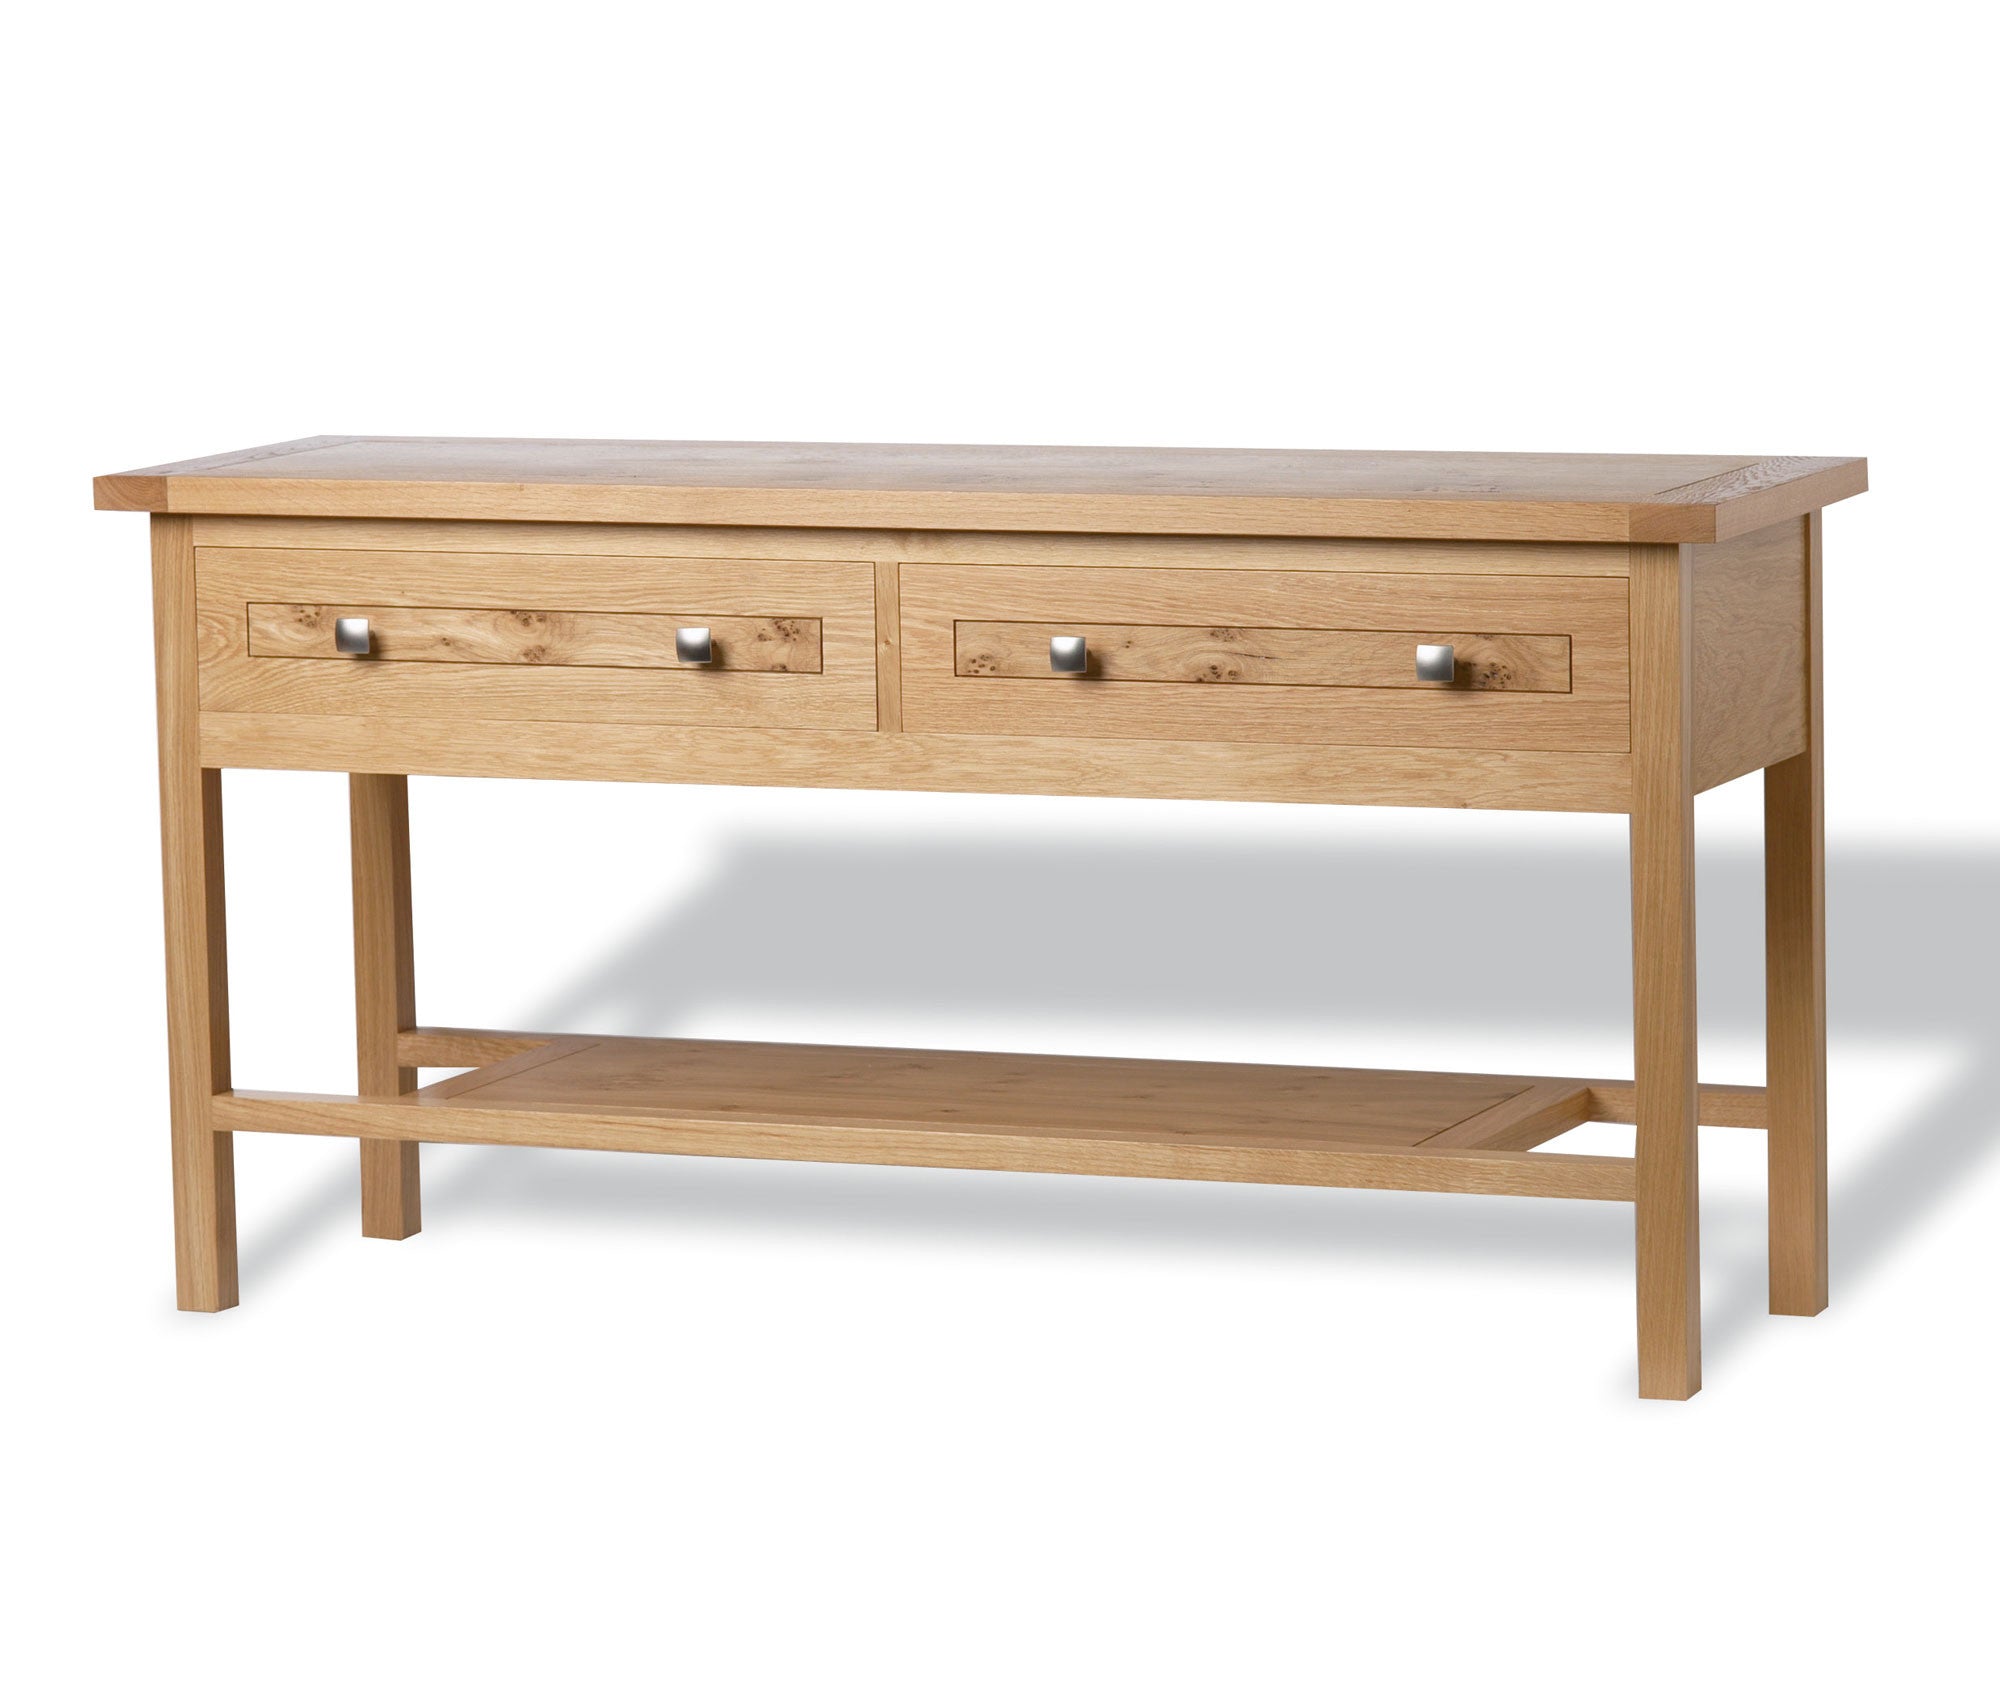 LT580P-Linton-Sidetable-with-Potboard